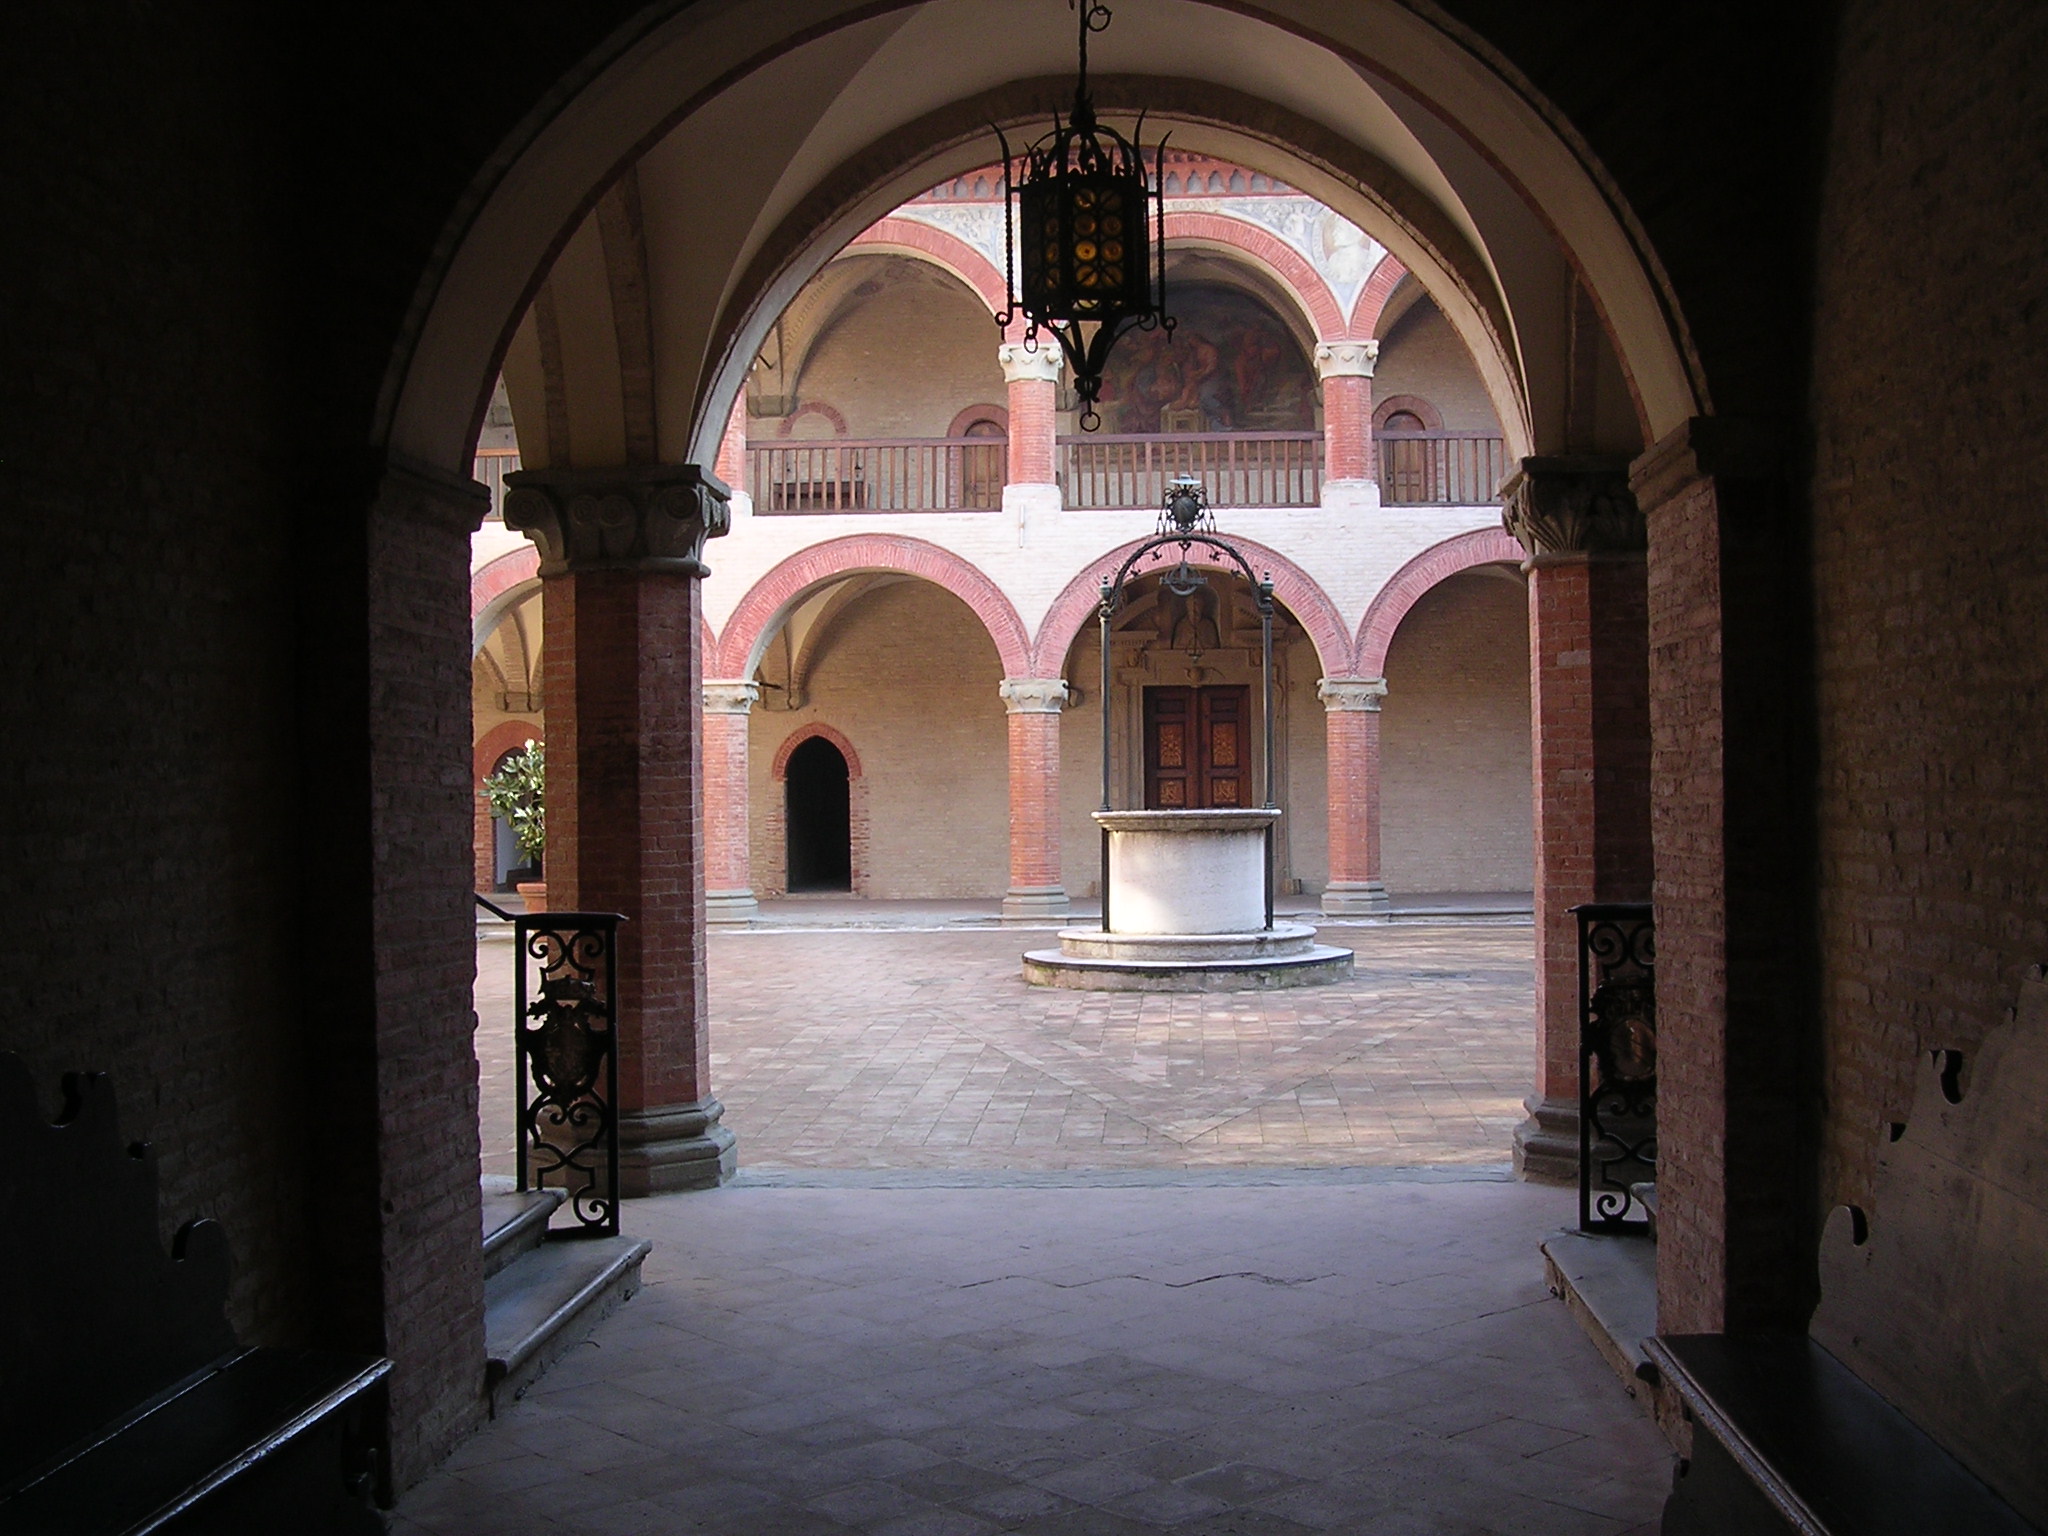 The Collegio di Spagna, a historic university college, originally founded to support Spanish students in Bologna, Italy.